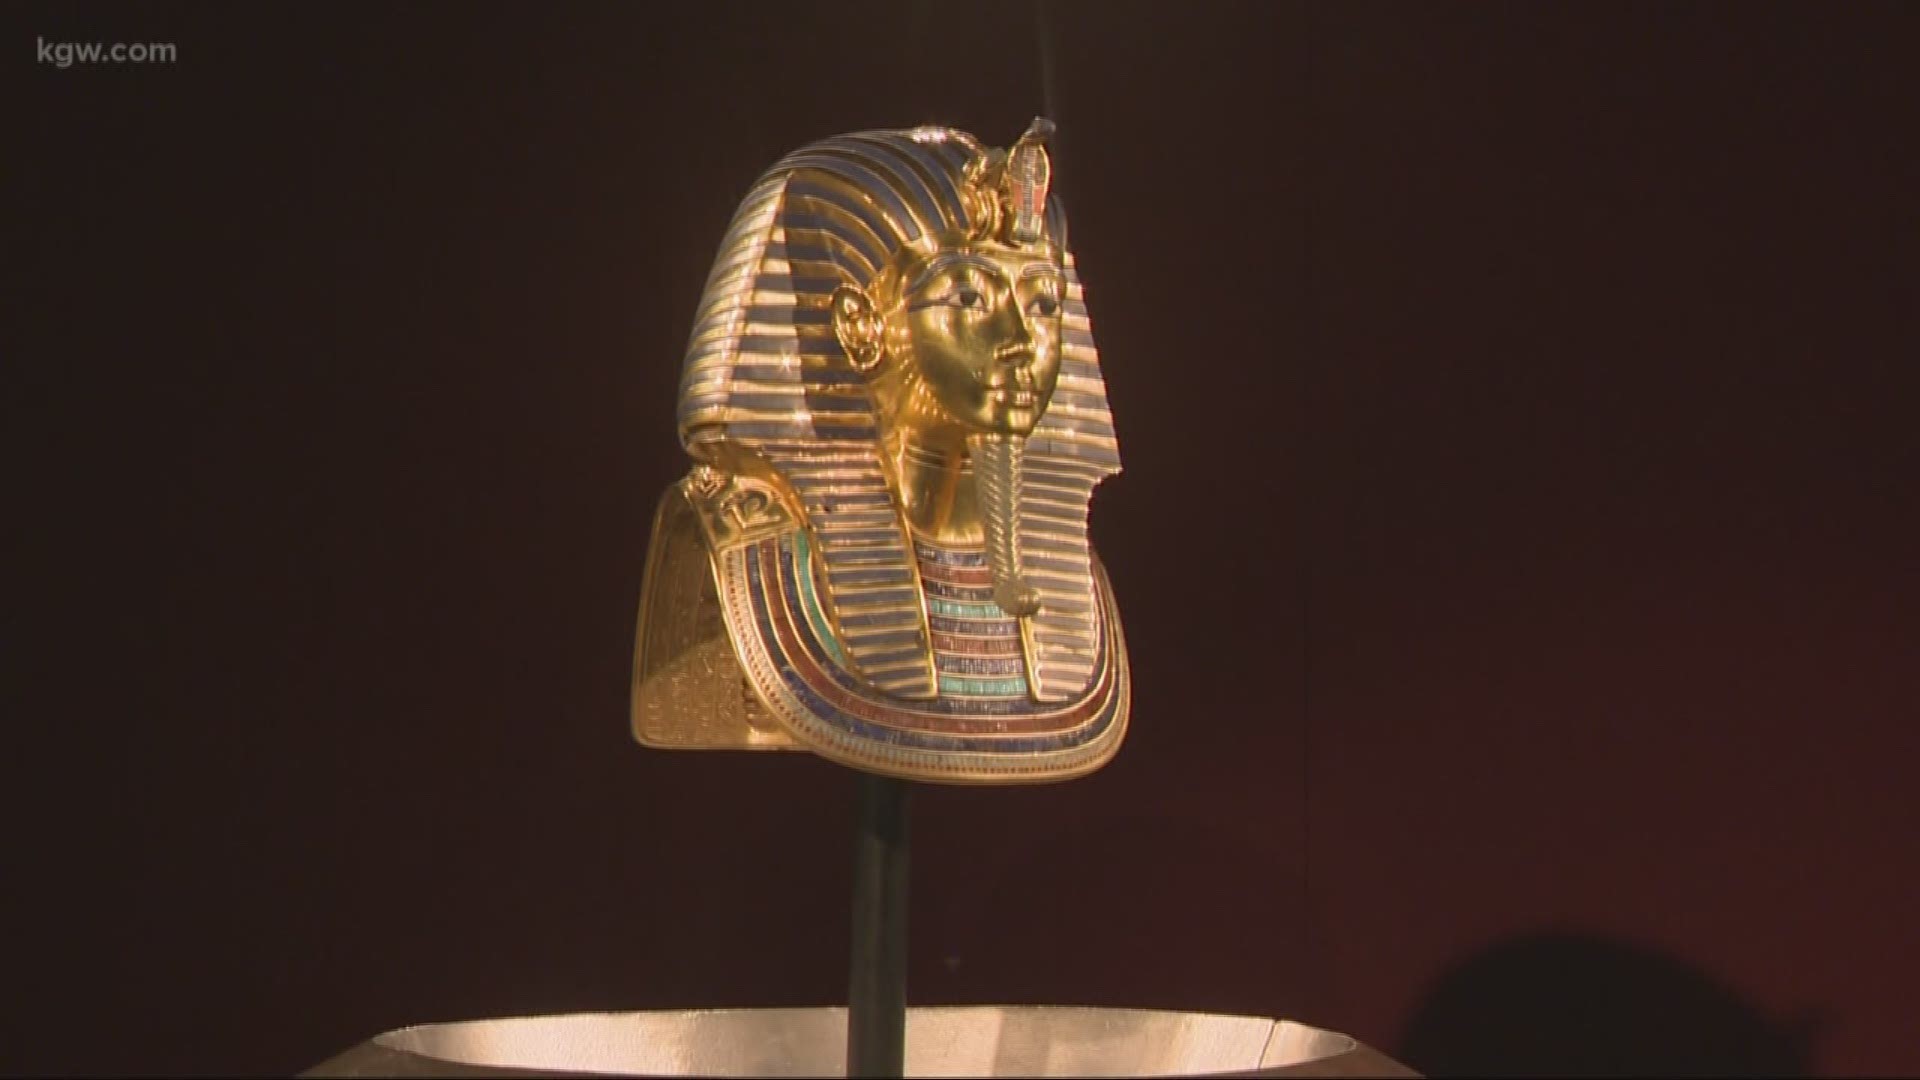 An interactive exhibit of key reproduced objects from the pharaoh's tomb is coming to OMSI. Egyptologist Zahi Hawass points out some highlights.